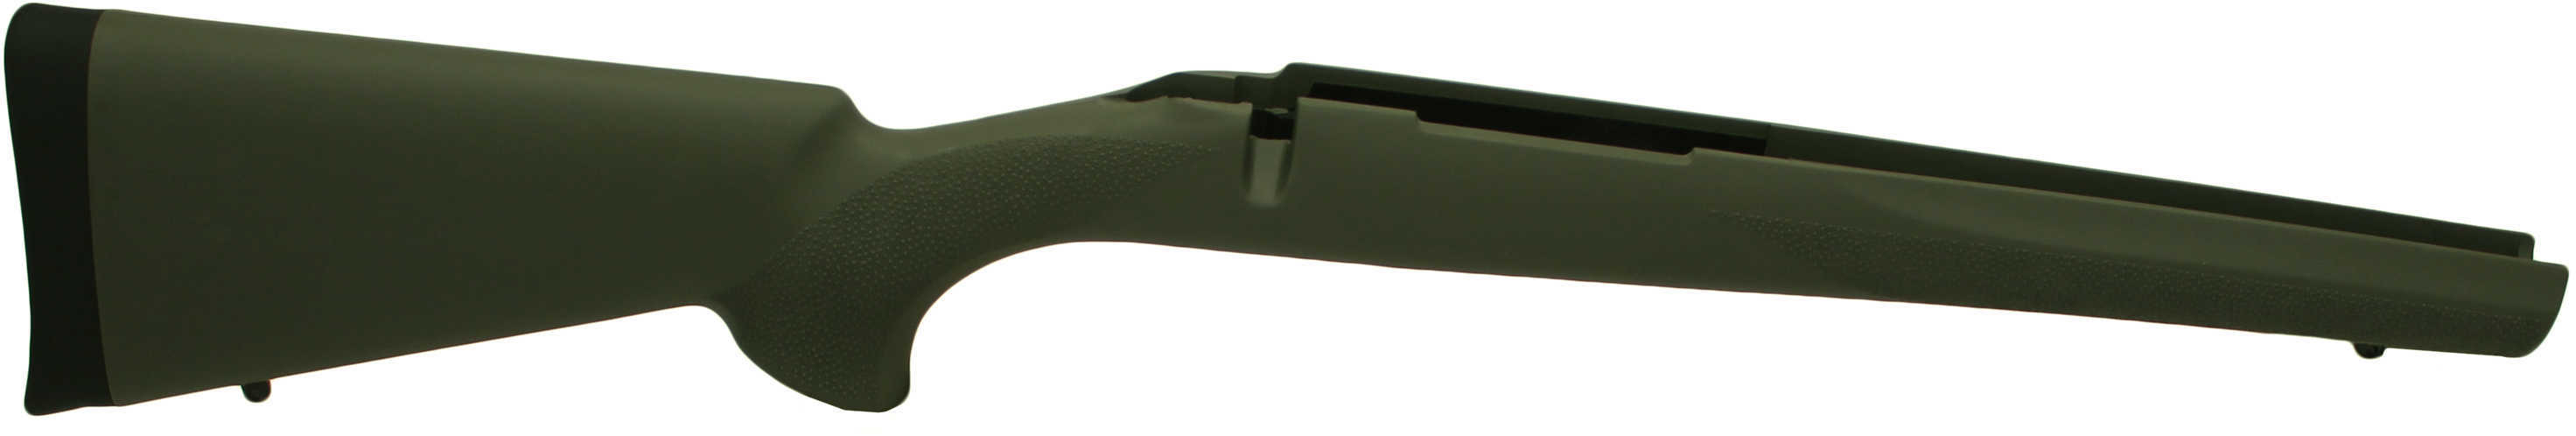 Hogue Rubber Overmolded Stock for Howa 1500/Weatherby Short Action, Heavvy Barrel, Pillar Bedding Olive Dr. Green 15210